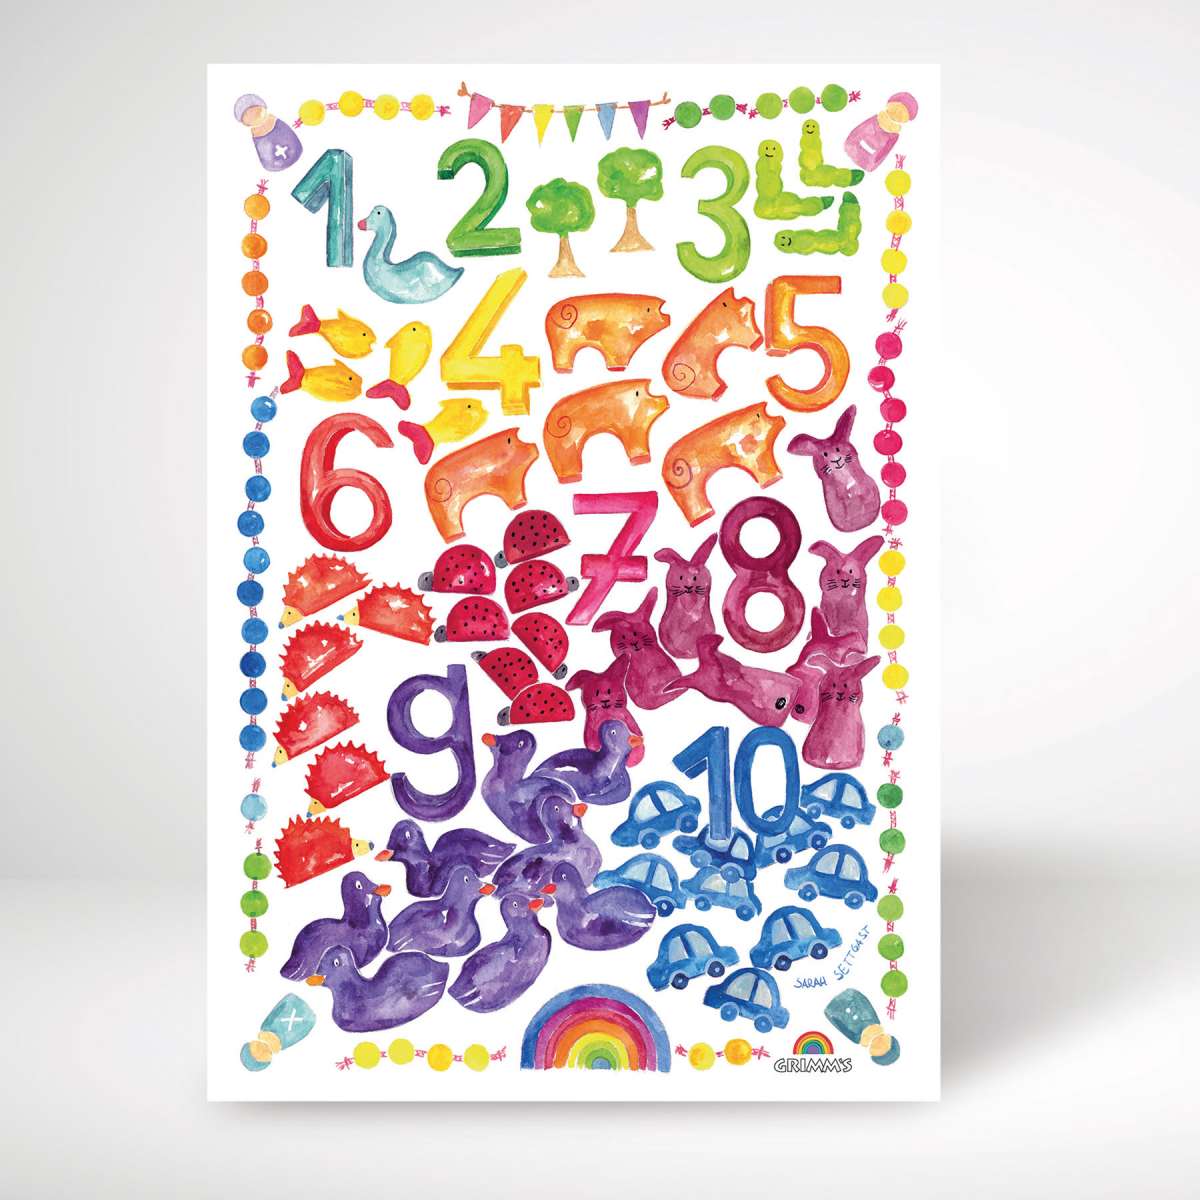 Grimm's Art Print World of Numbers